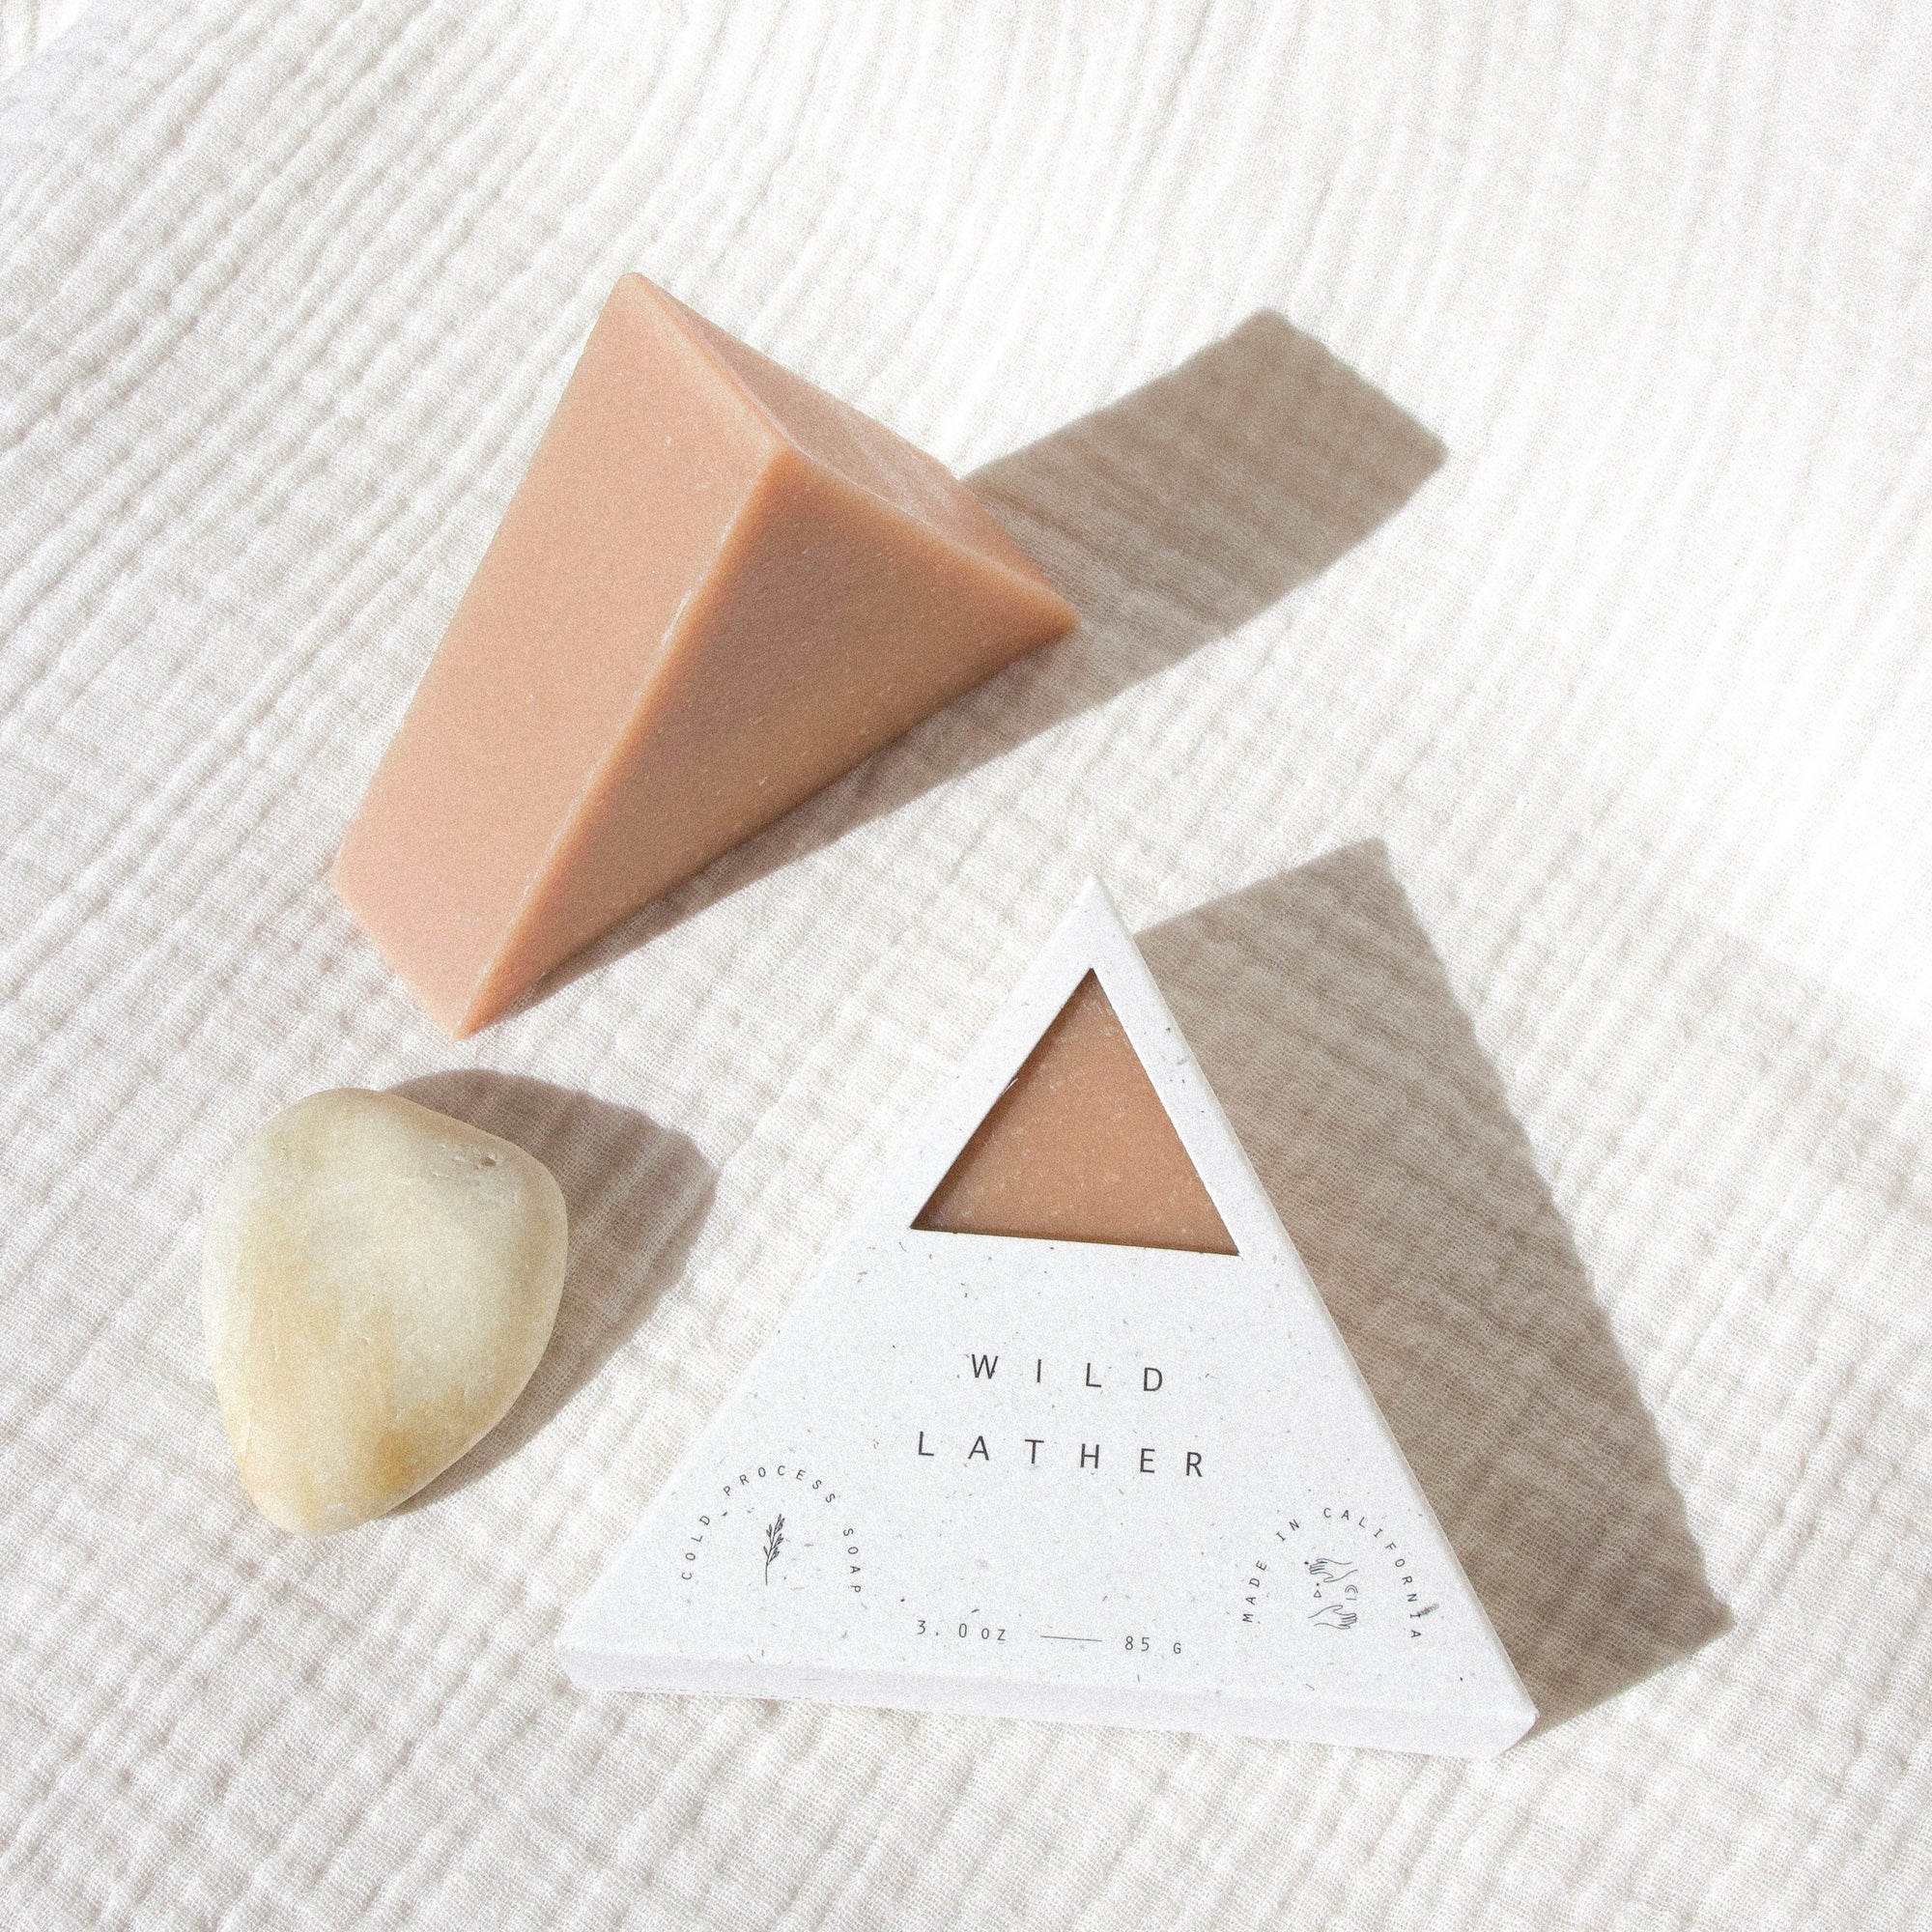 Pink clay soap packaged in a speckled white triangle box